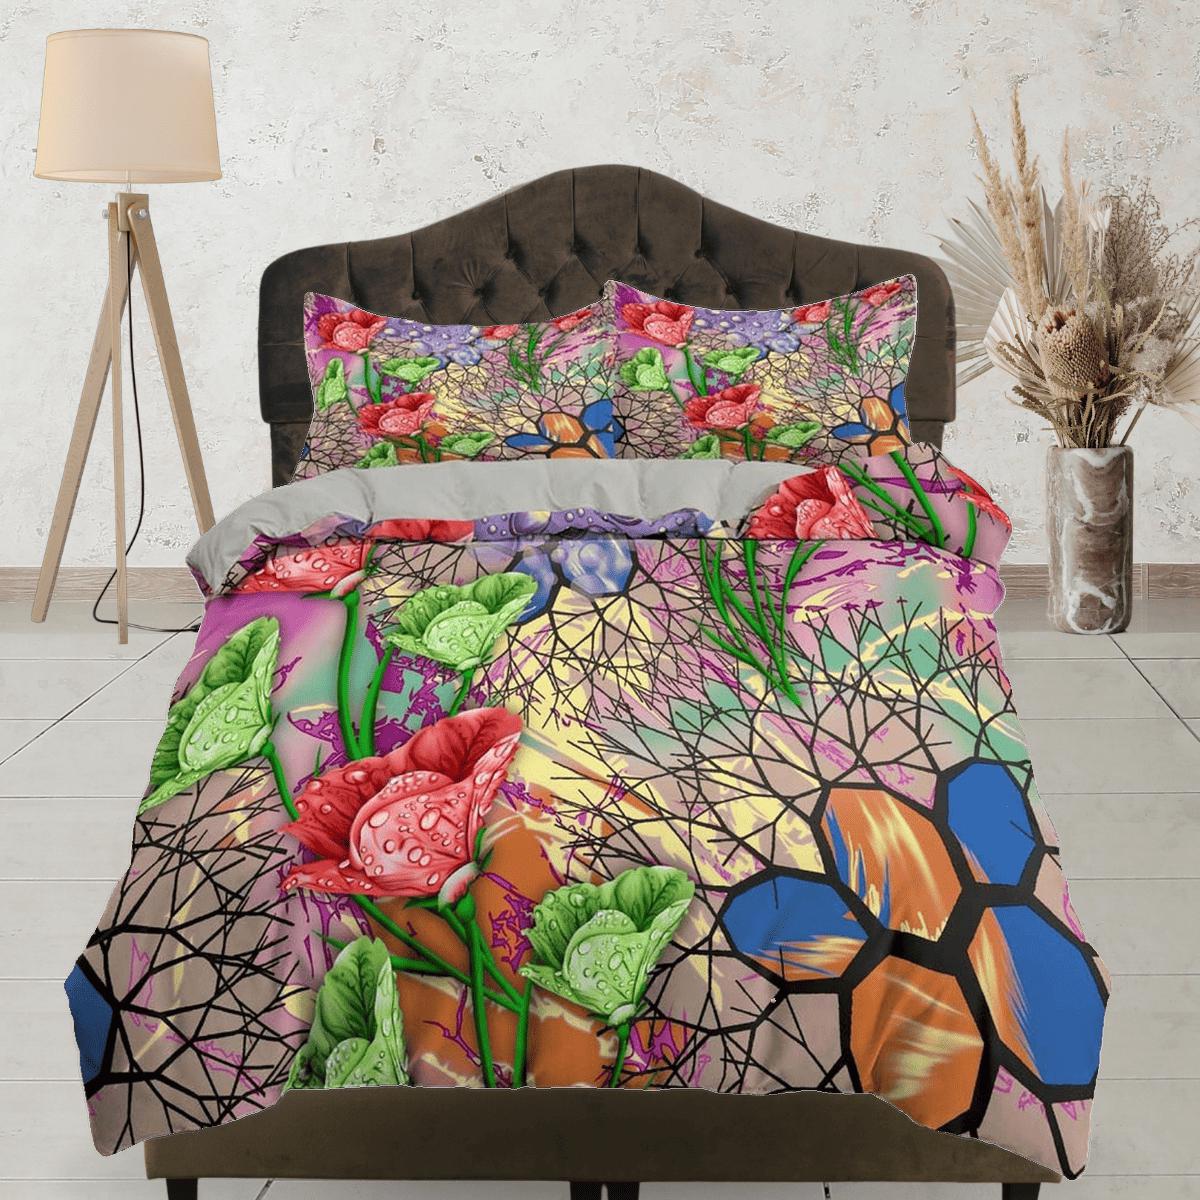 daintyduvet Colorful bedding floral duvet cover abstract, teen girl bedroom, baby girl crib bedding boho maximalist bedspread aesthetic bedding